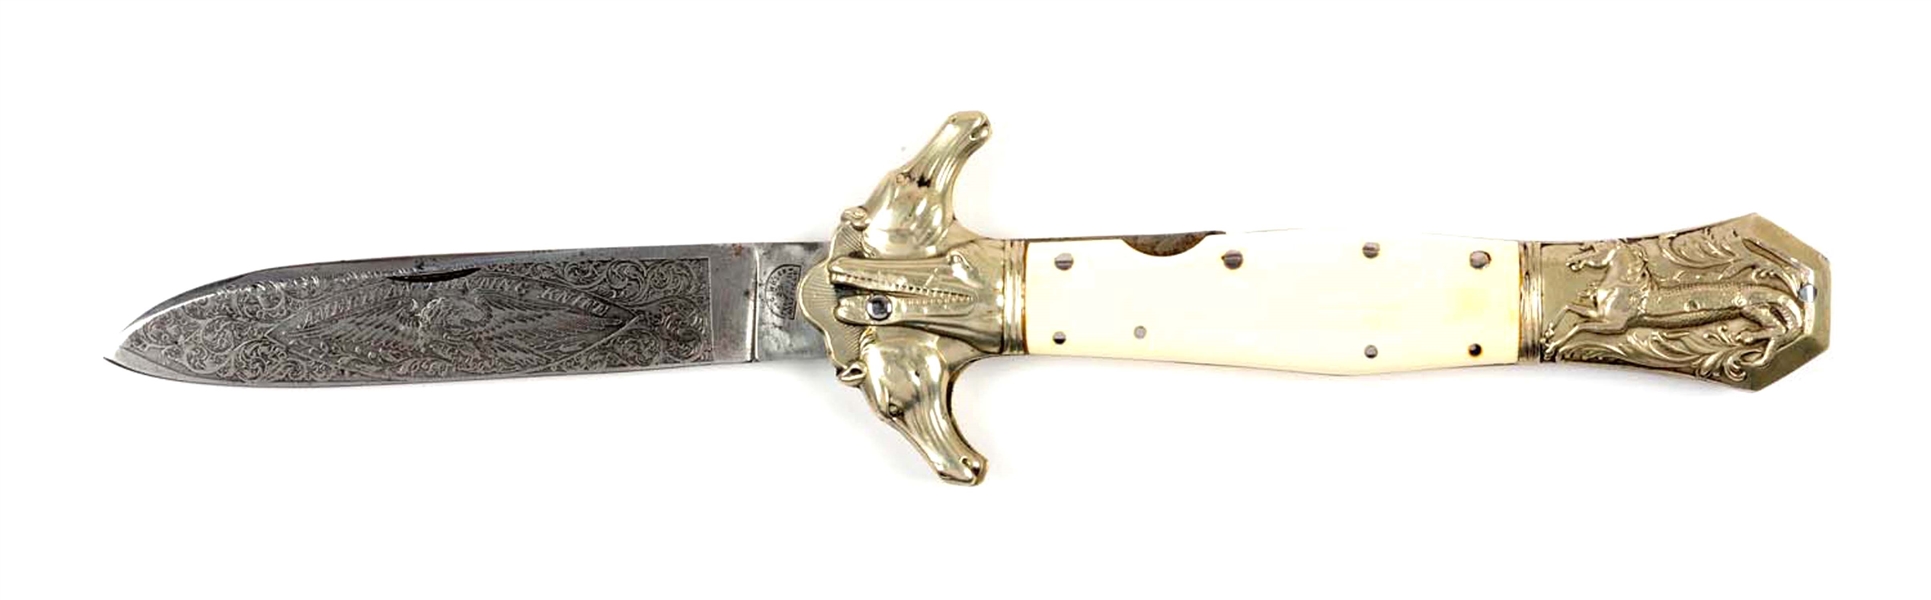 DOUBLE HORSE-ALLIGATOR FOLDING BOWIE KNIFE BY S.C. WRAGG, SHEFFIELD.